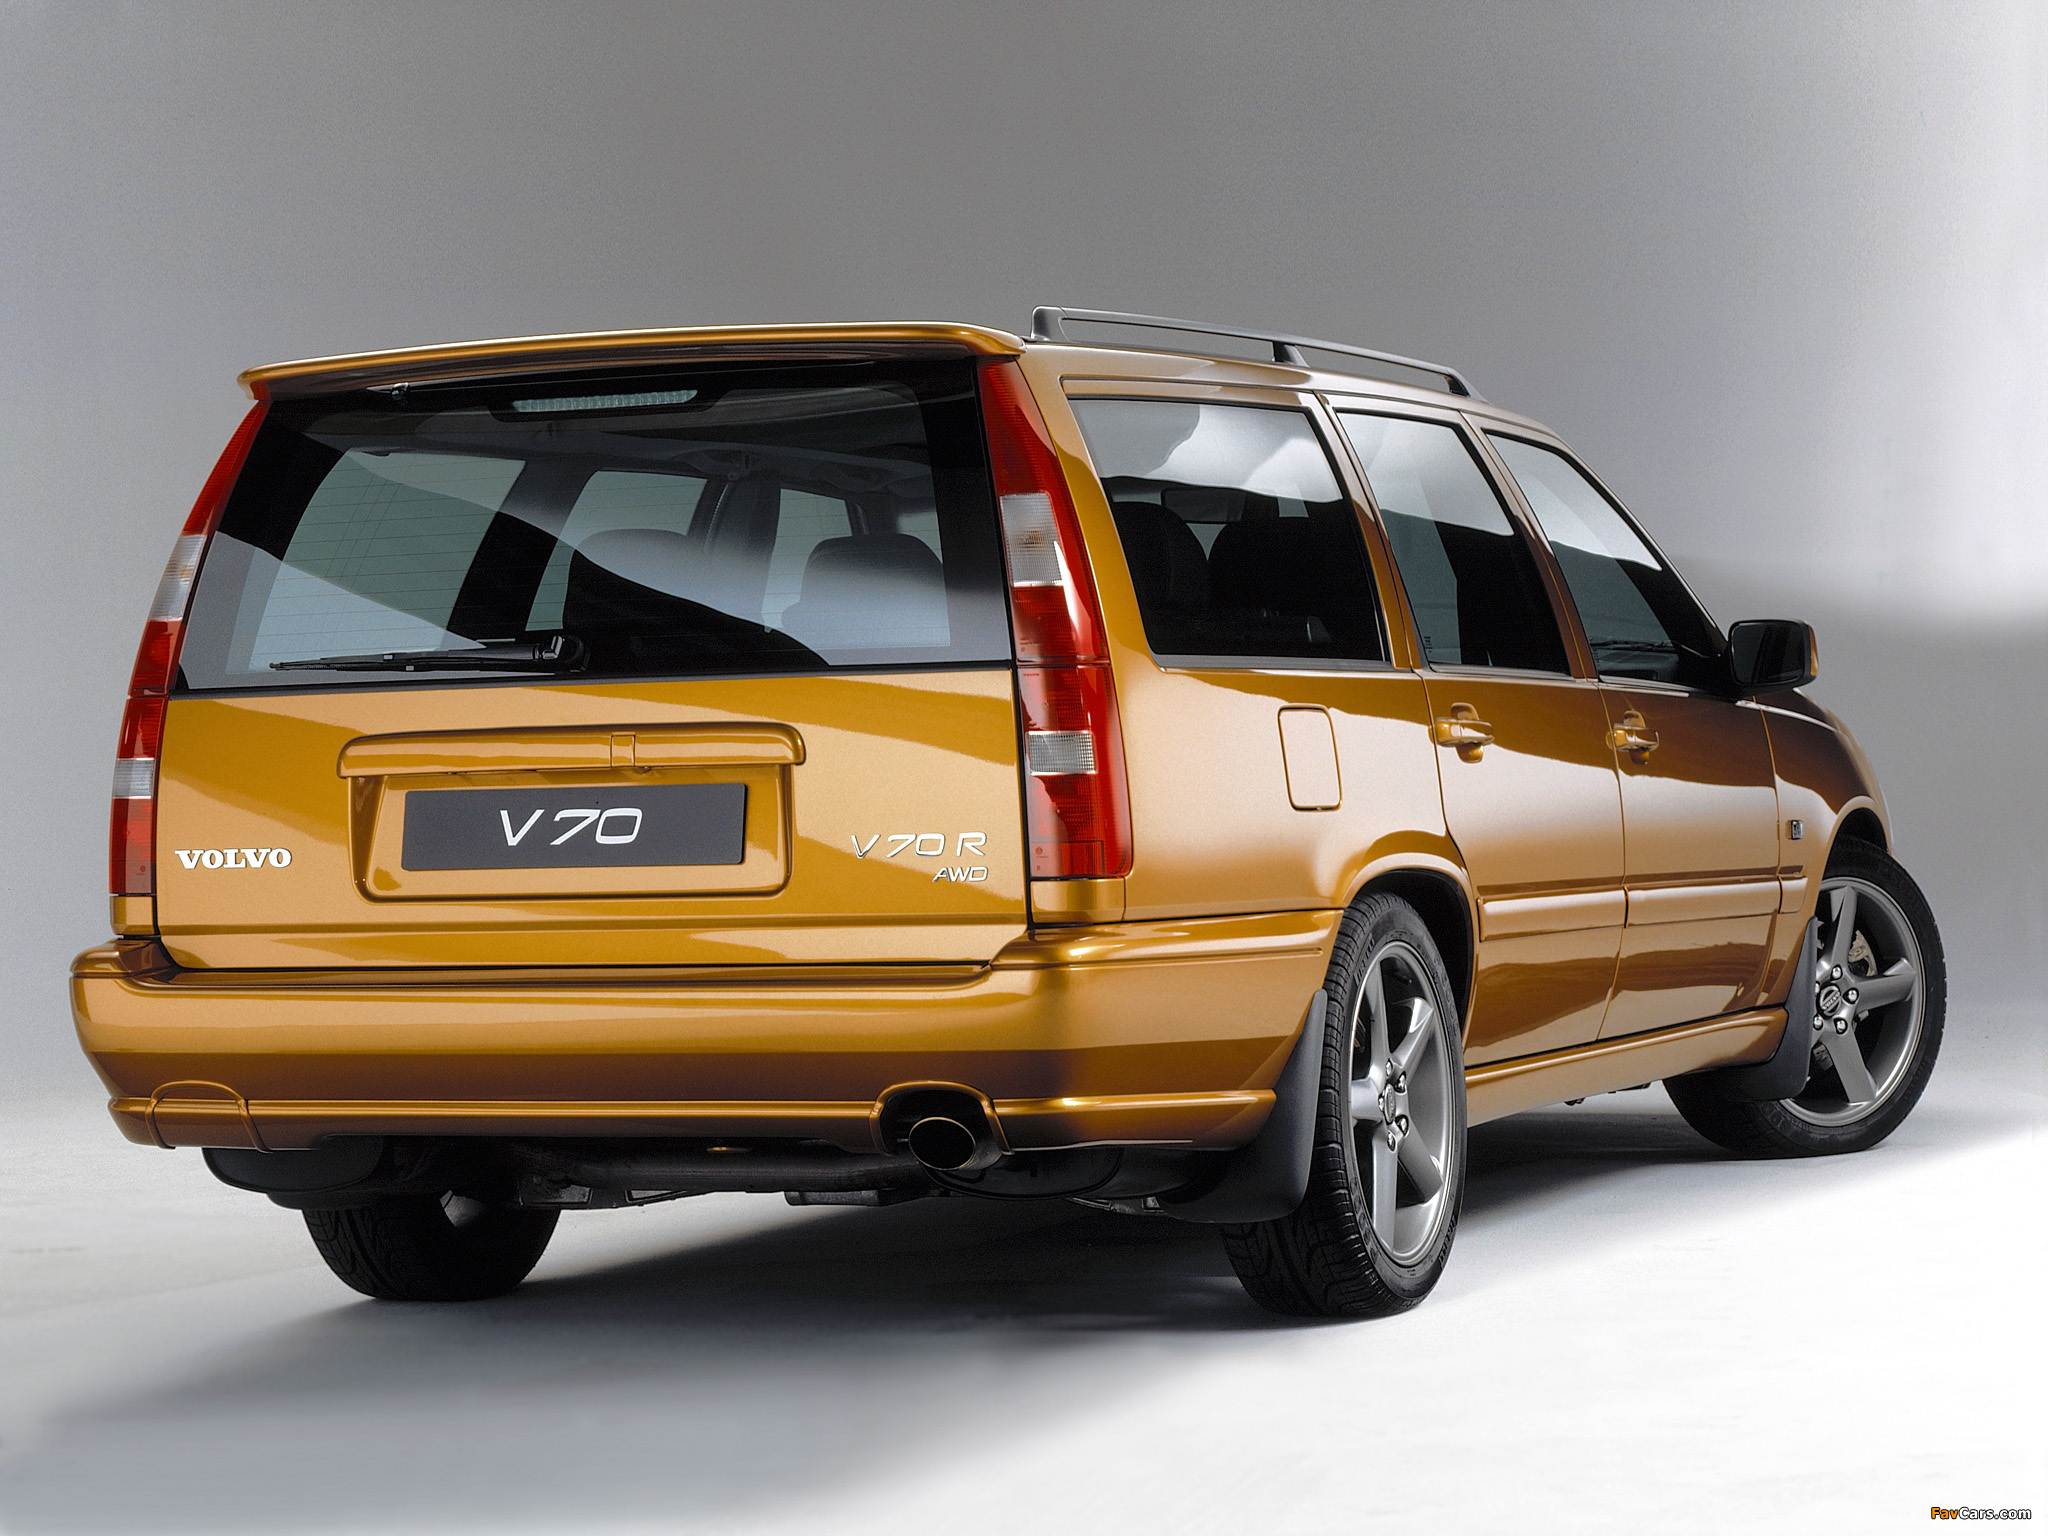 Volvo V70 R 19972000 pictures (2048x1536)